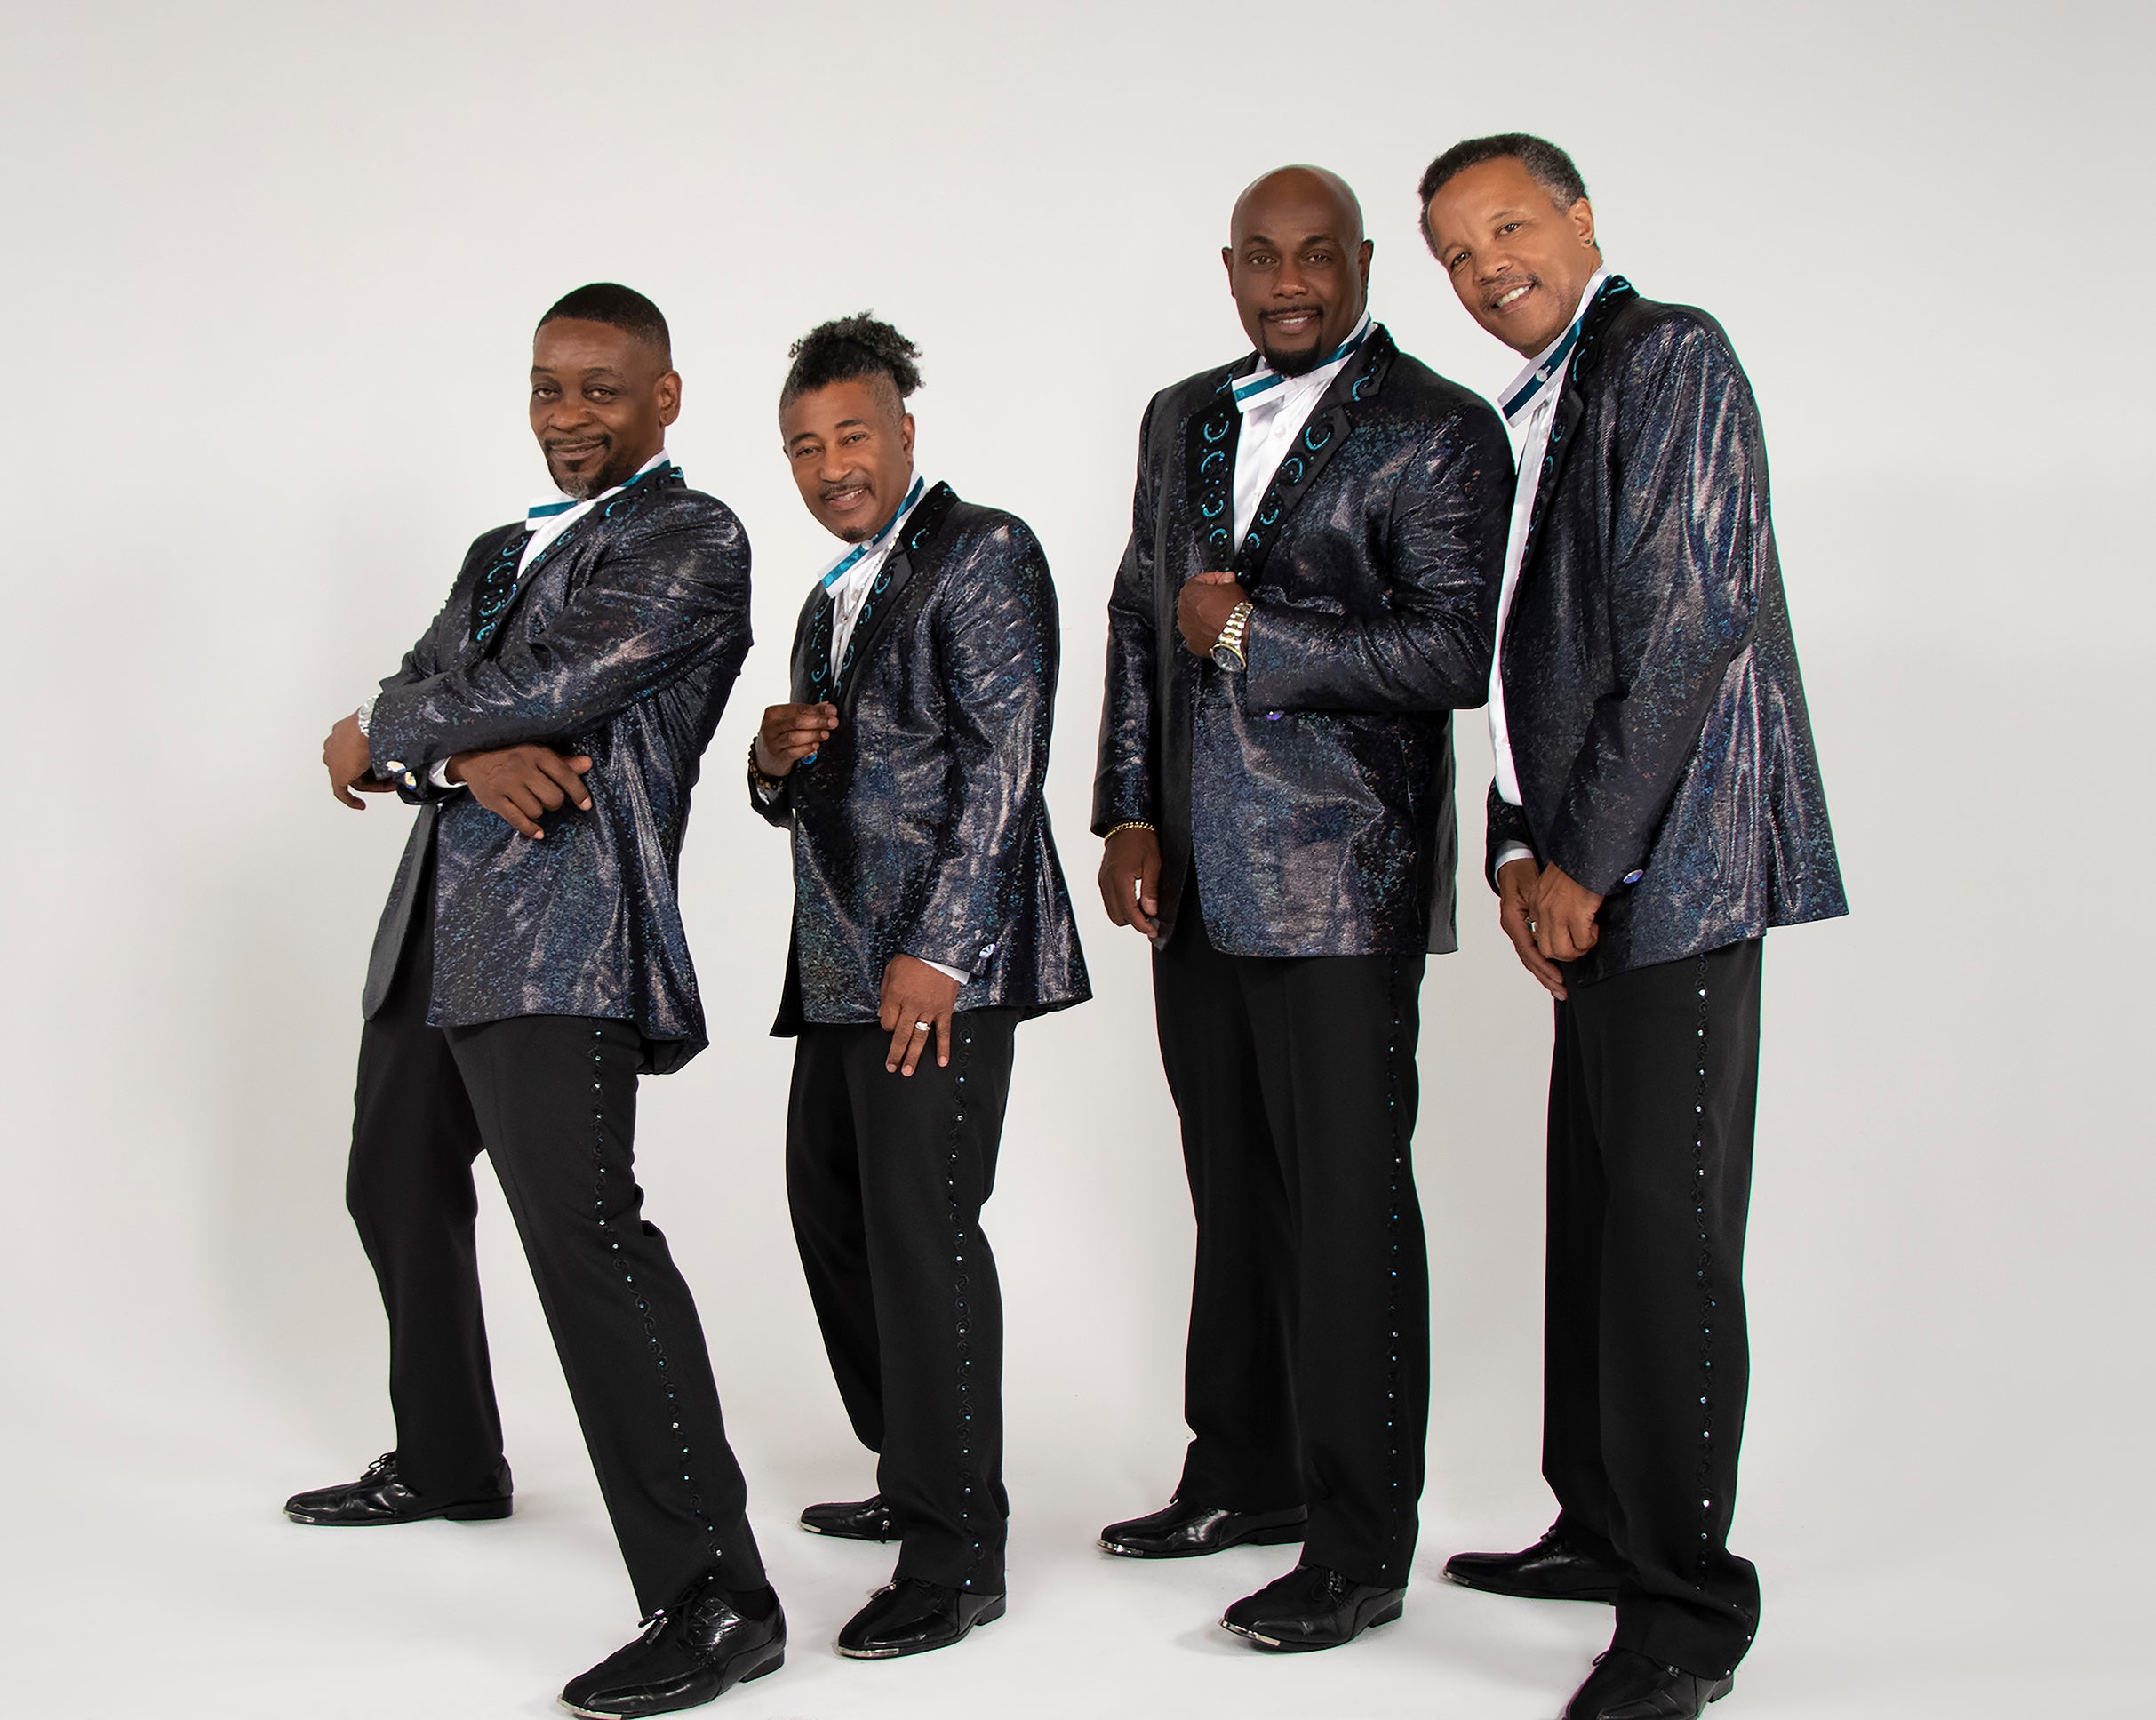 Water For People Presents: The Spinners pre-sale code for show tickets in Evansville, IN (Victory Theatre)